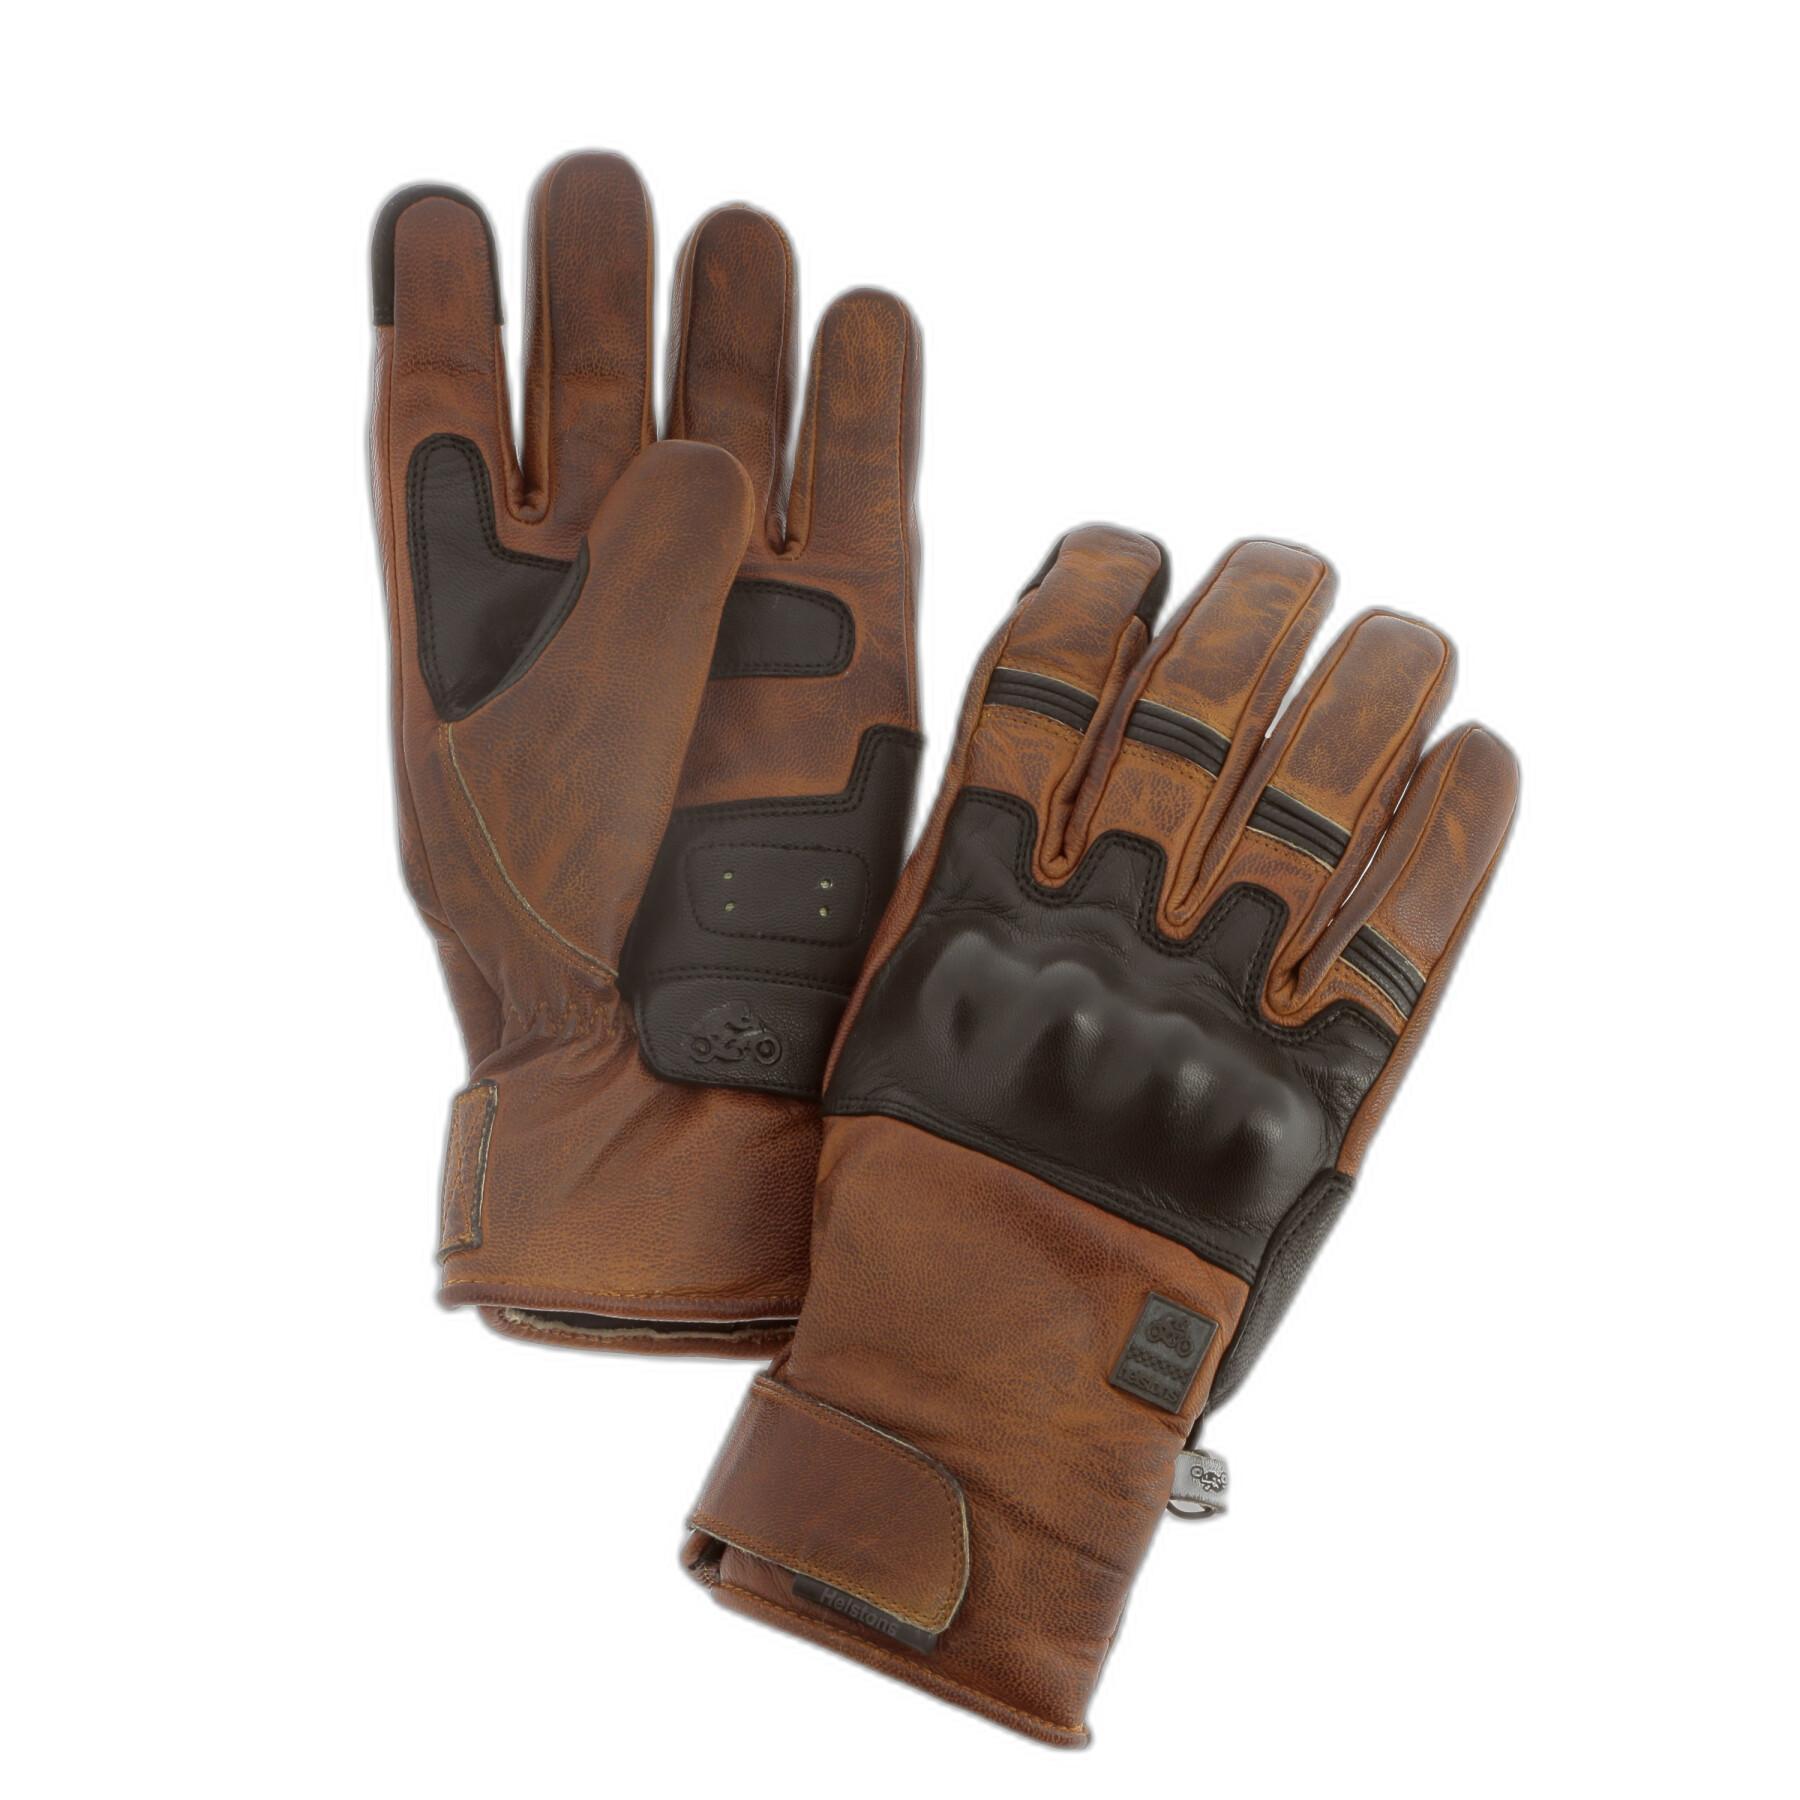 Winter leather motorcycle gloves Helstons Wislay